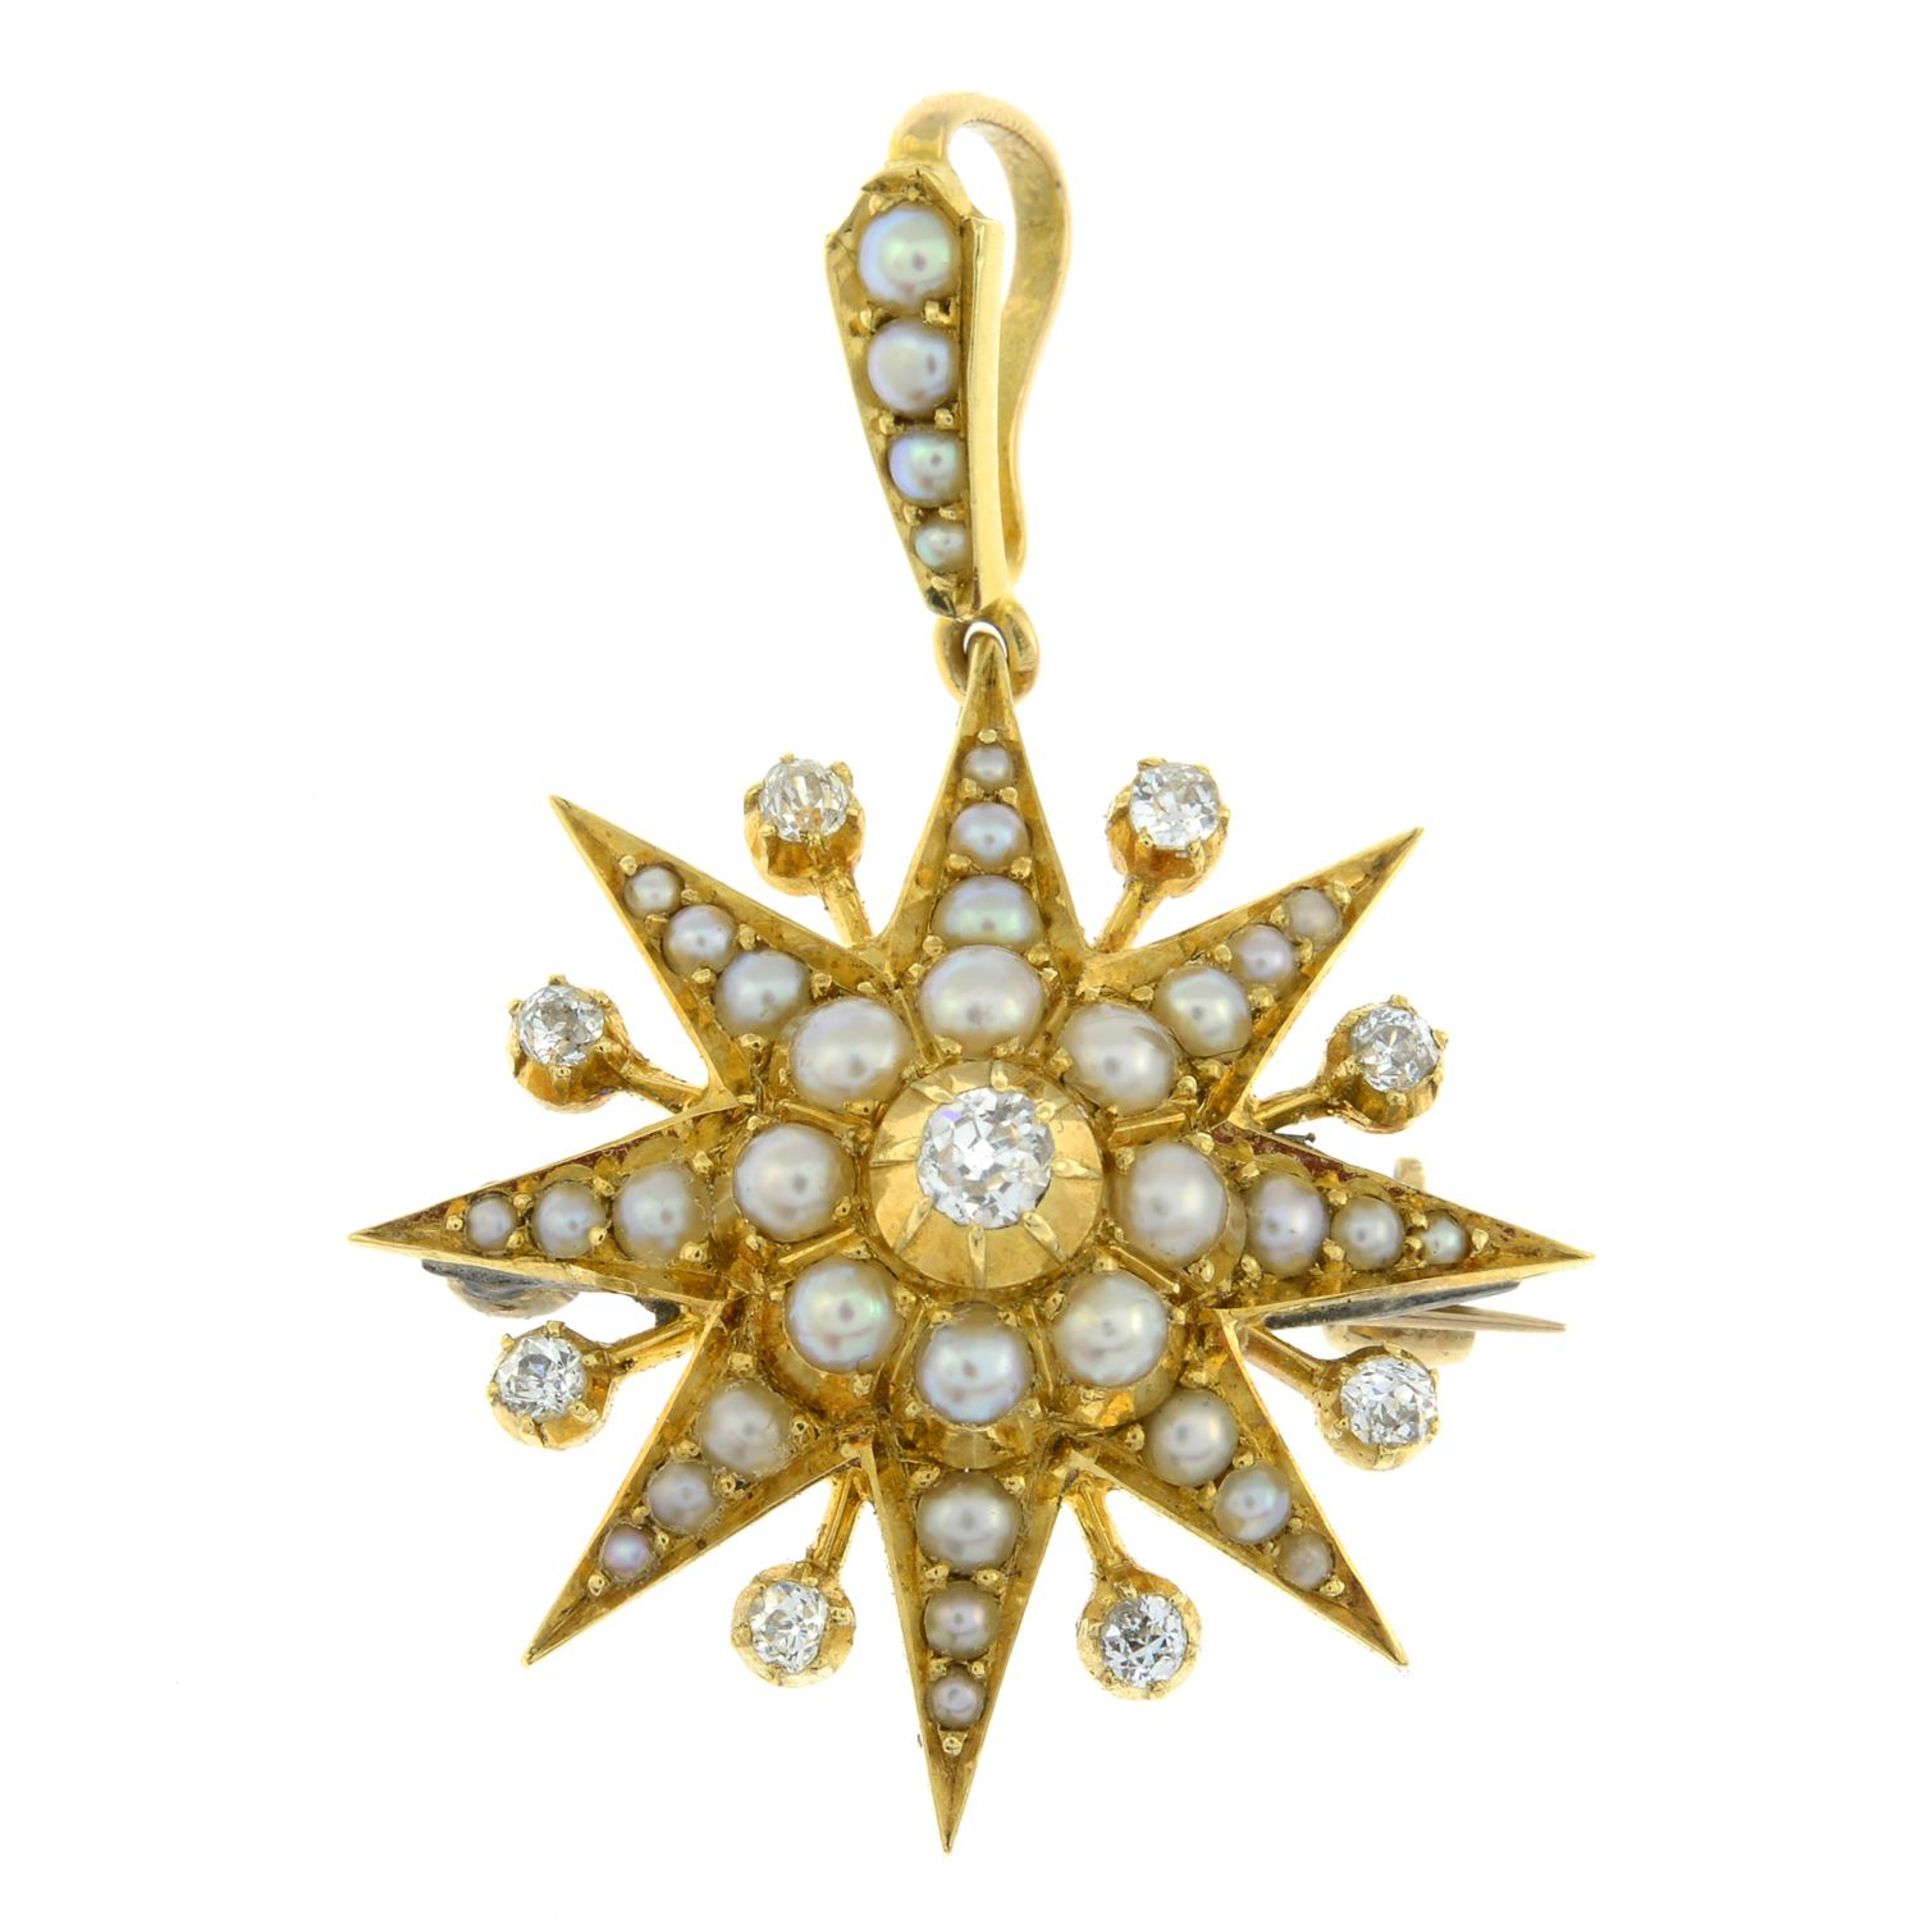 An early 20th century 15ct gold old-cut diamond and split pearl pendant/brooch.